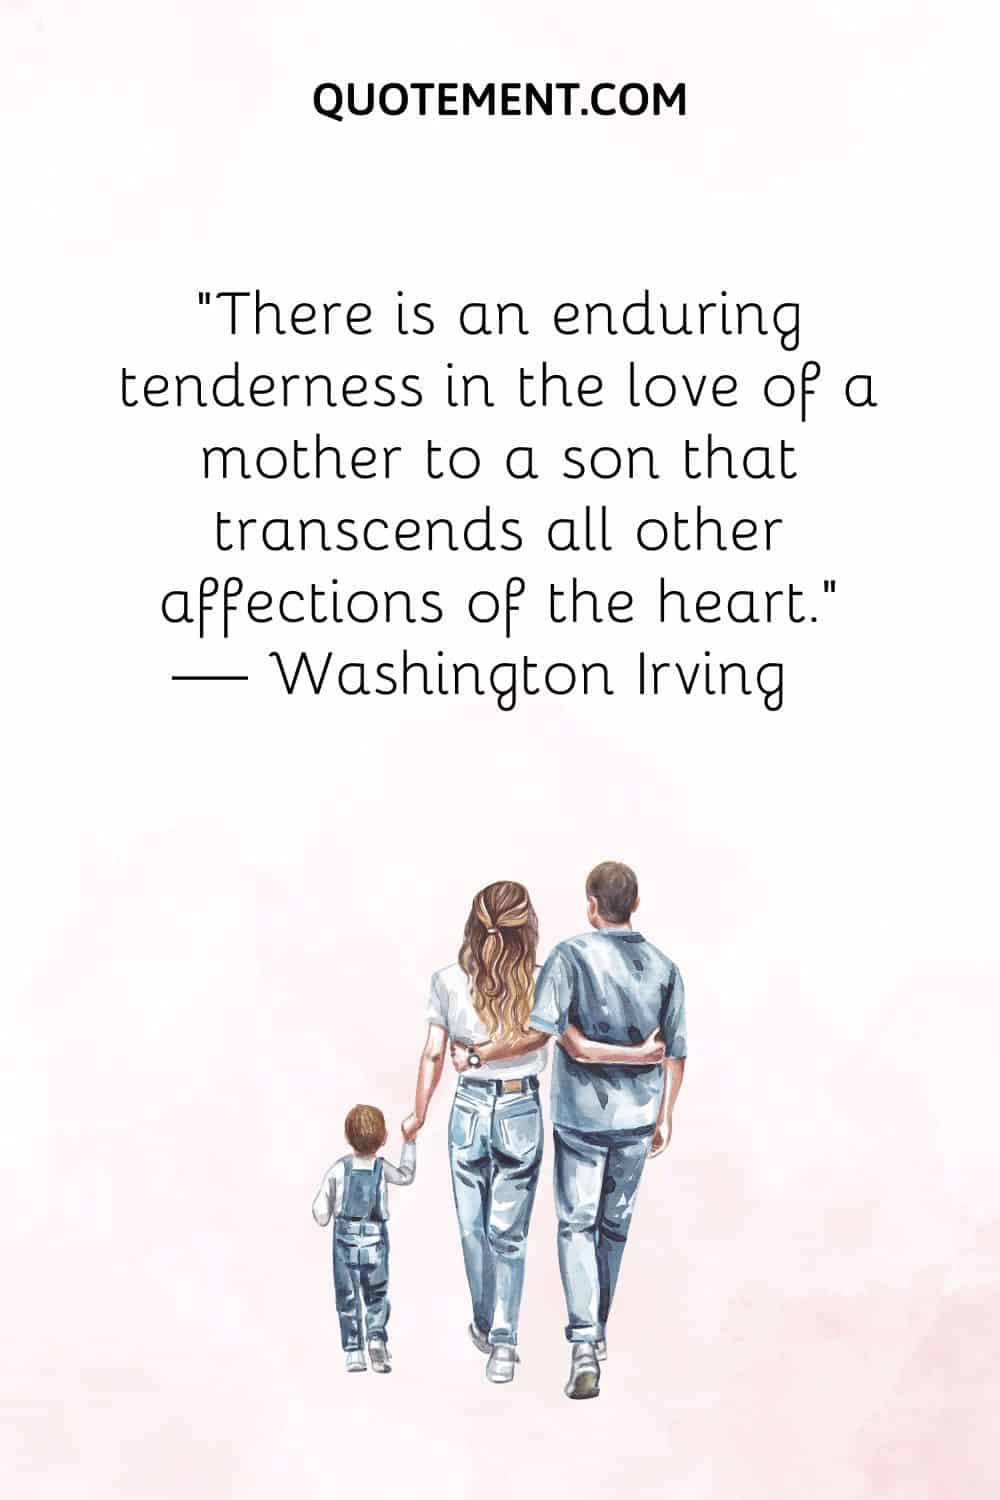 hugged parents walking with son image representing mother son love quote